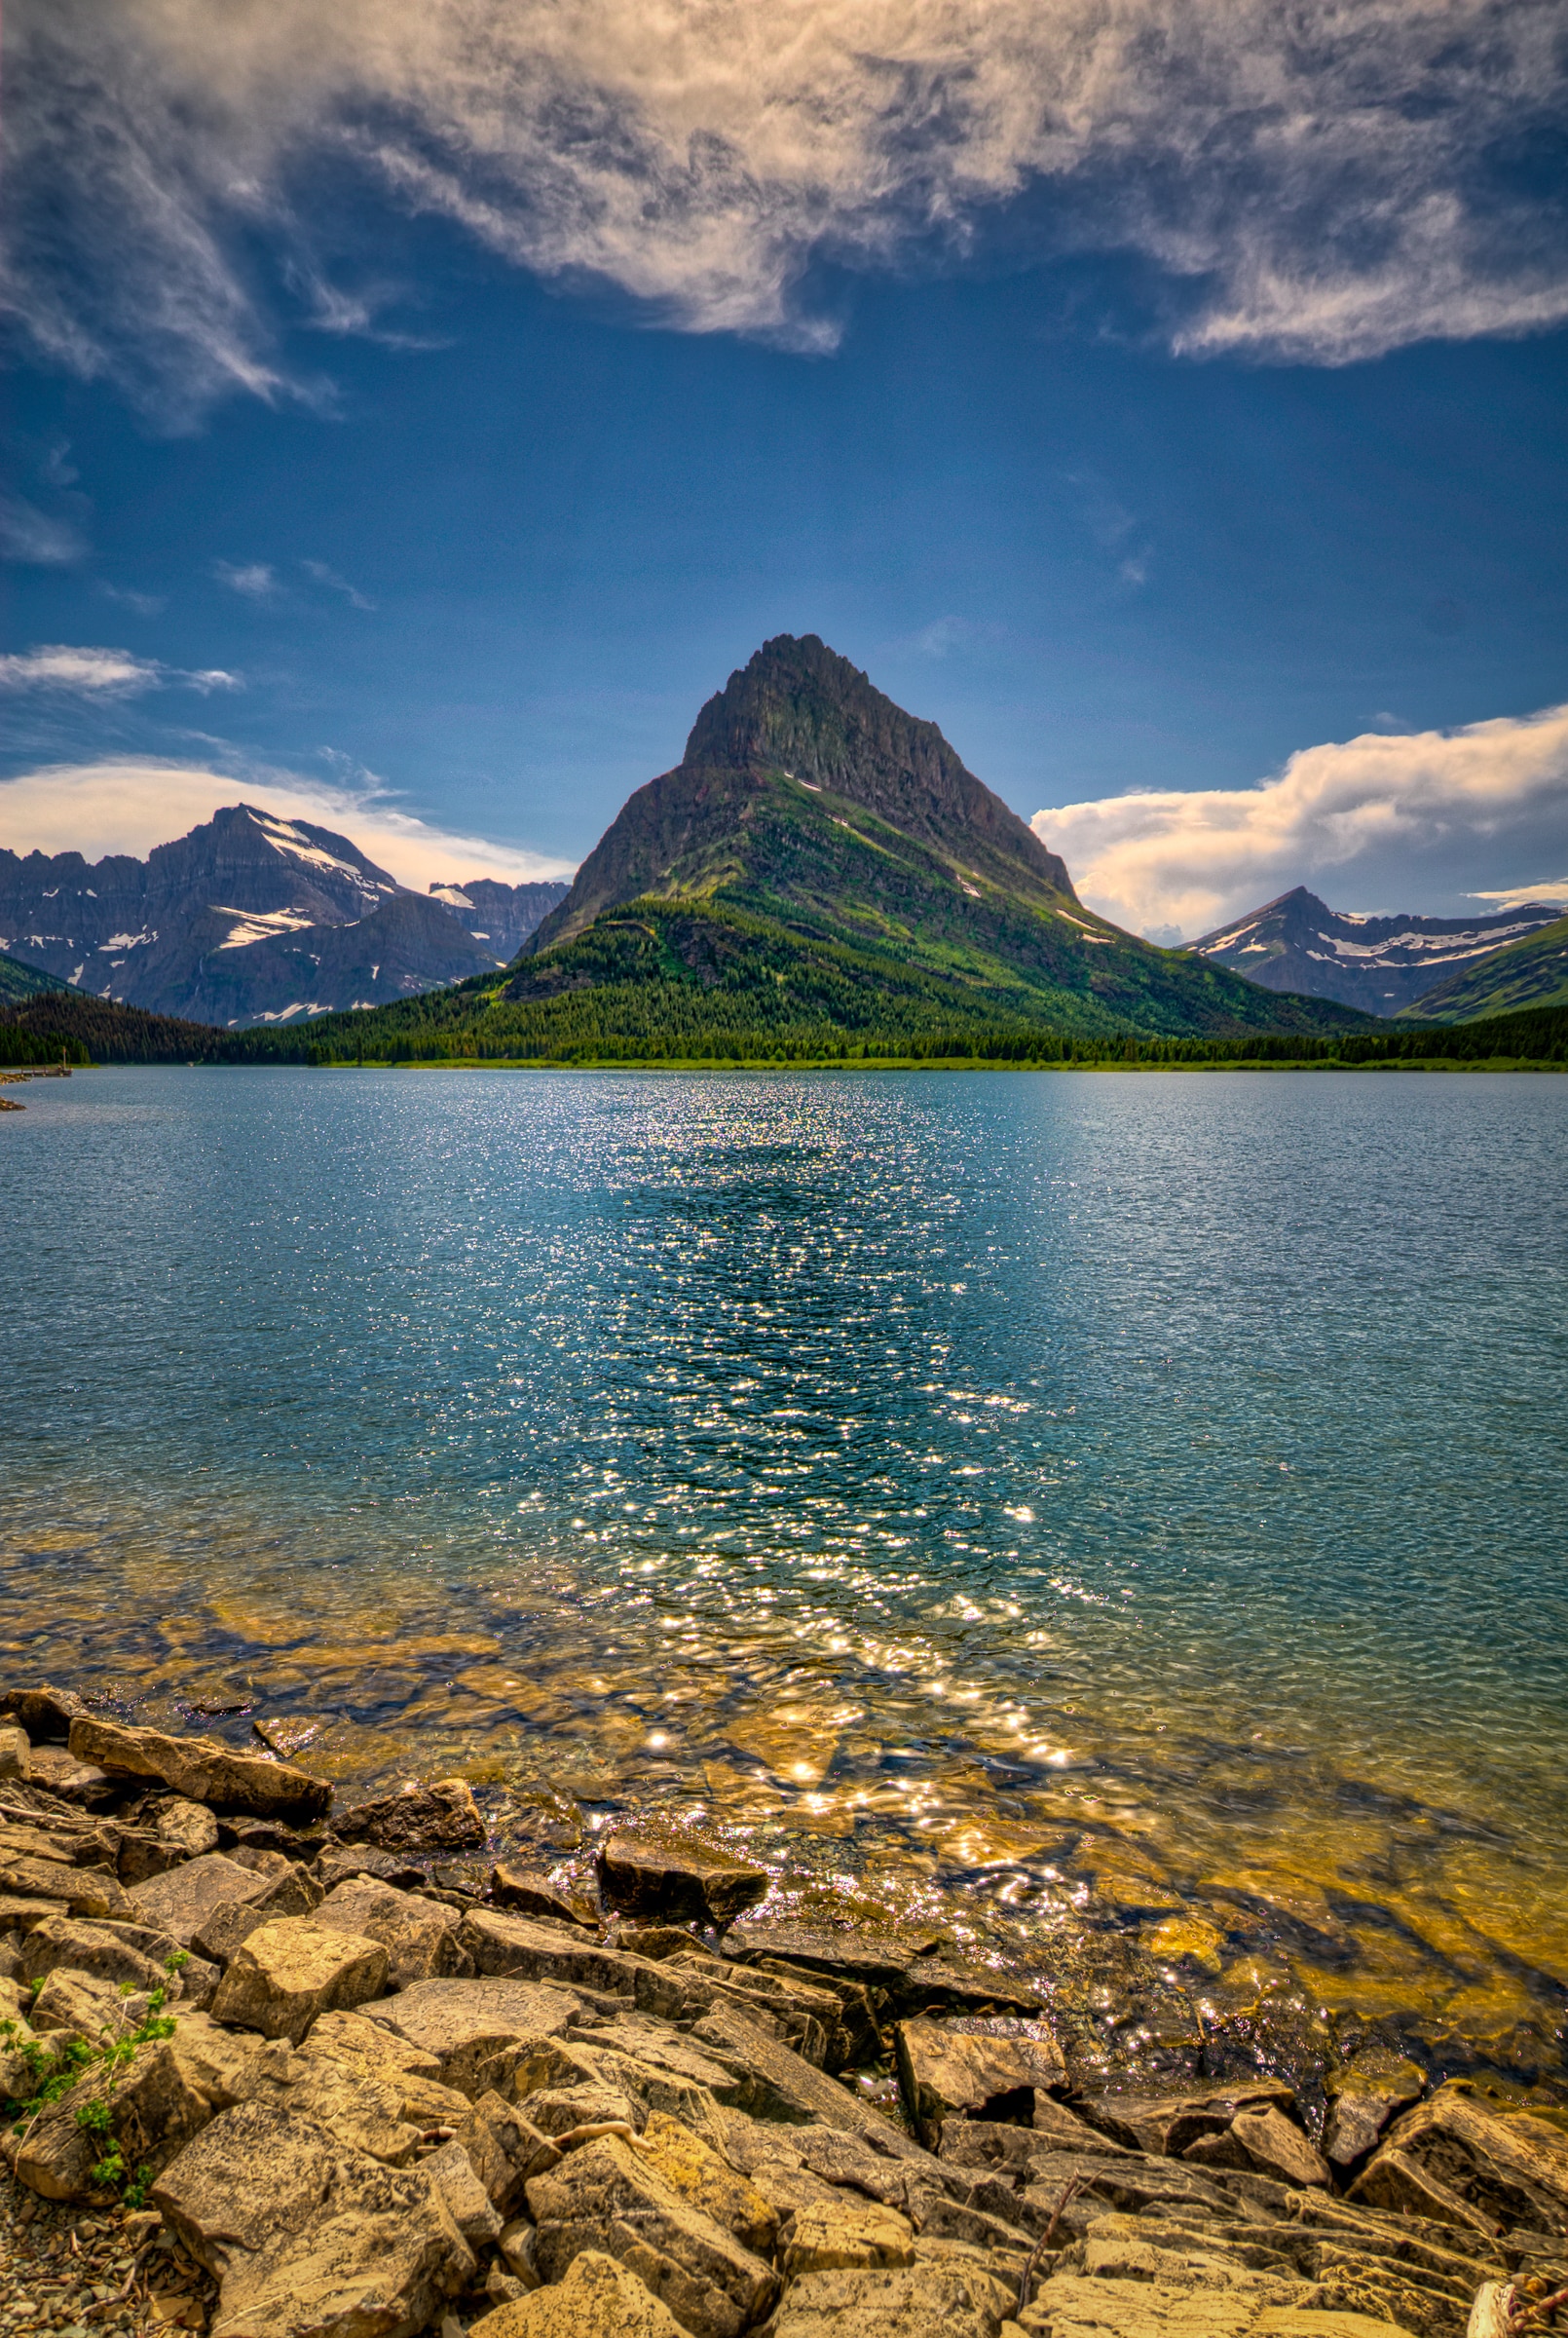 Afternoon sunlight sparkles on Swiftcurrent Lake with Mt. Grinnell in the background in Glacier National Park, Montana.